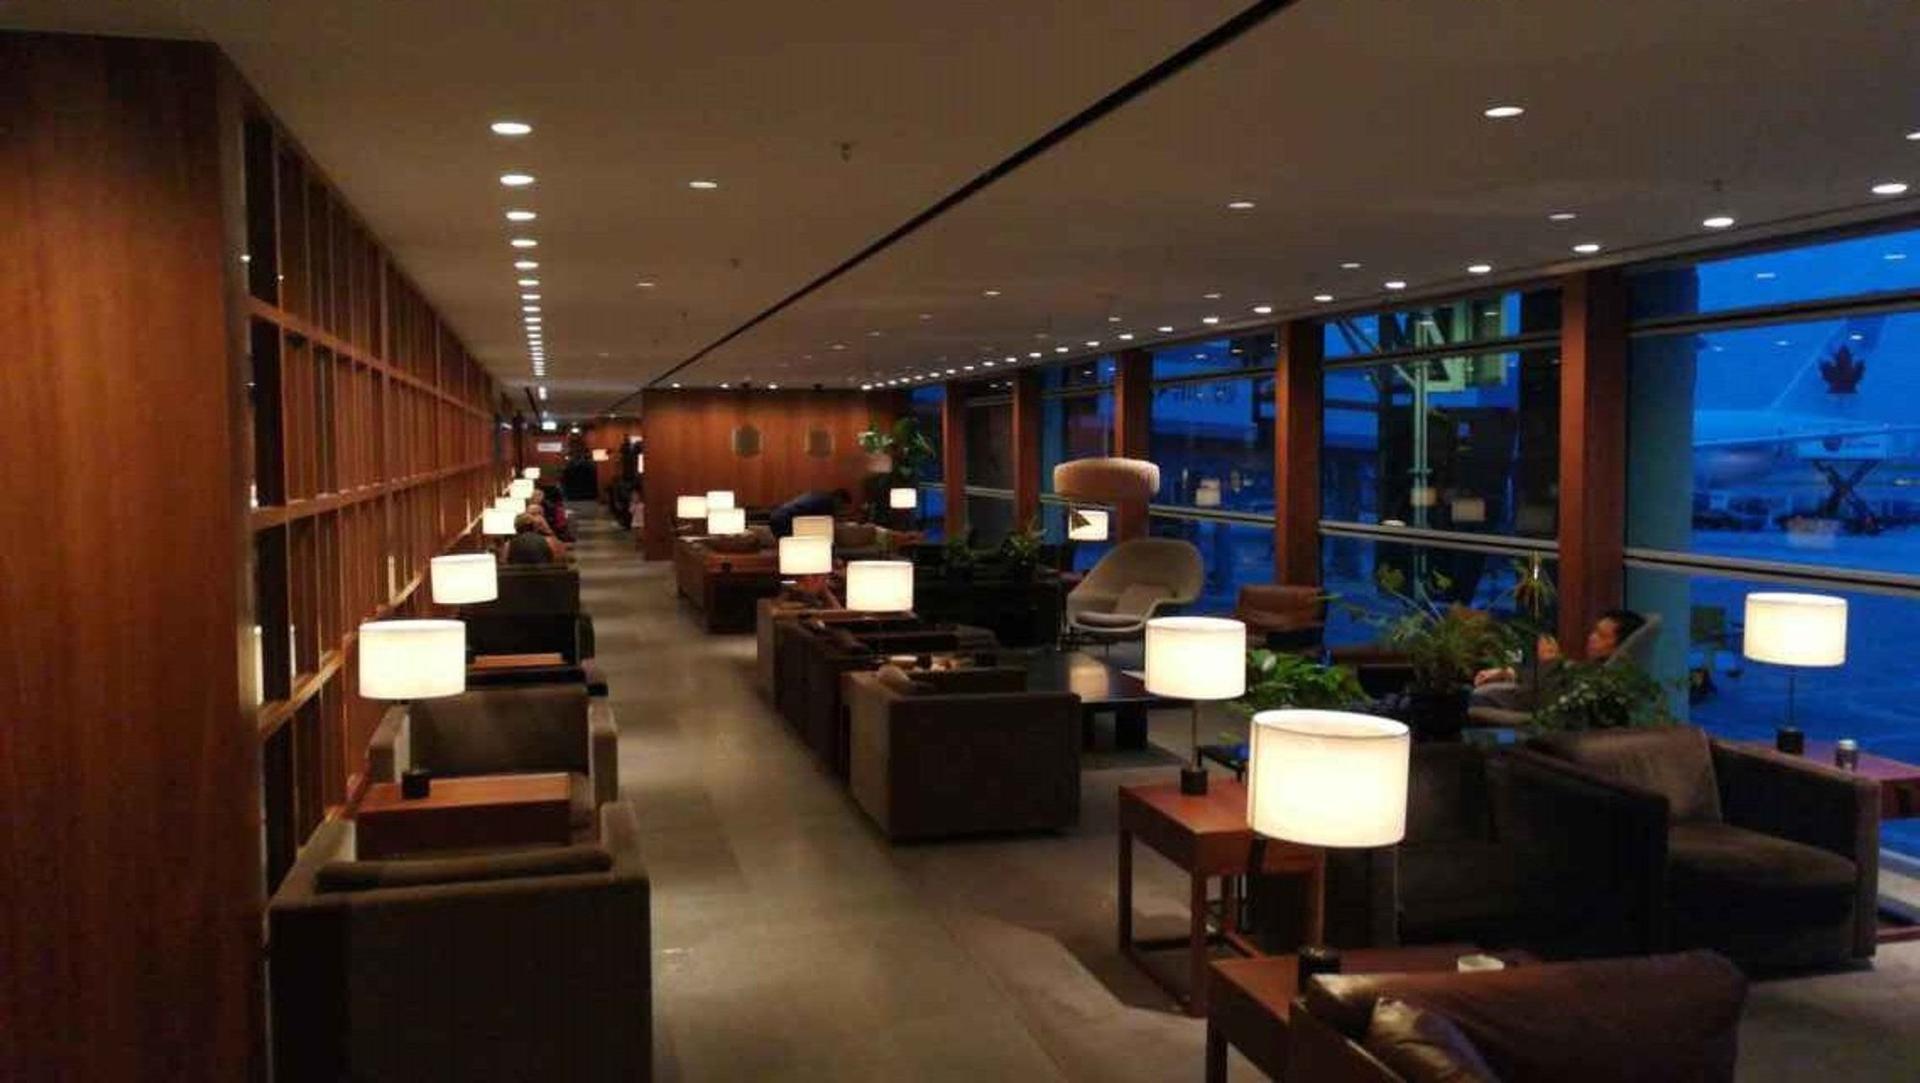 Cathay Pacific The Pier Business Class Lounge image 49 of 61